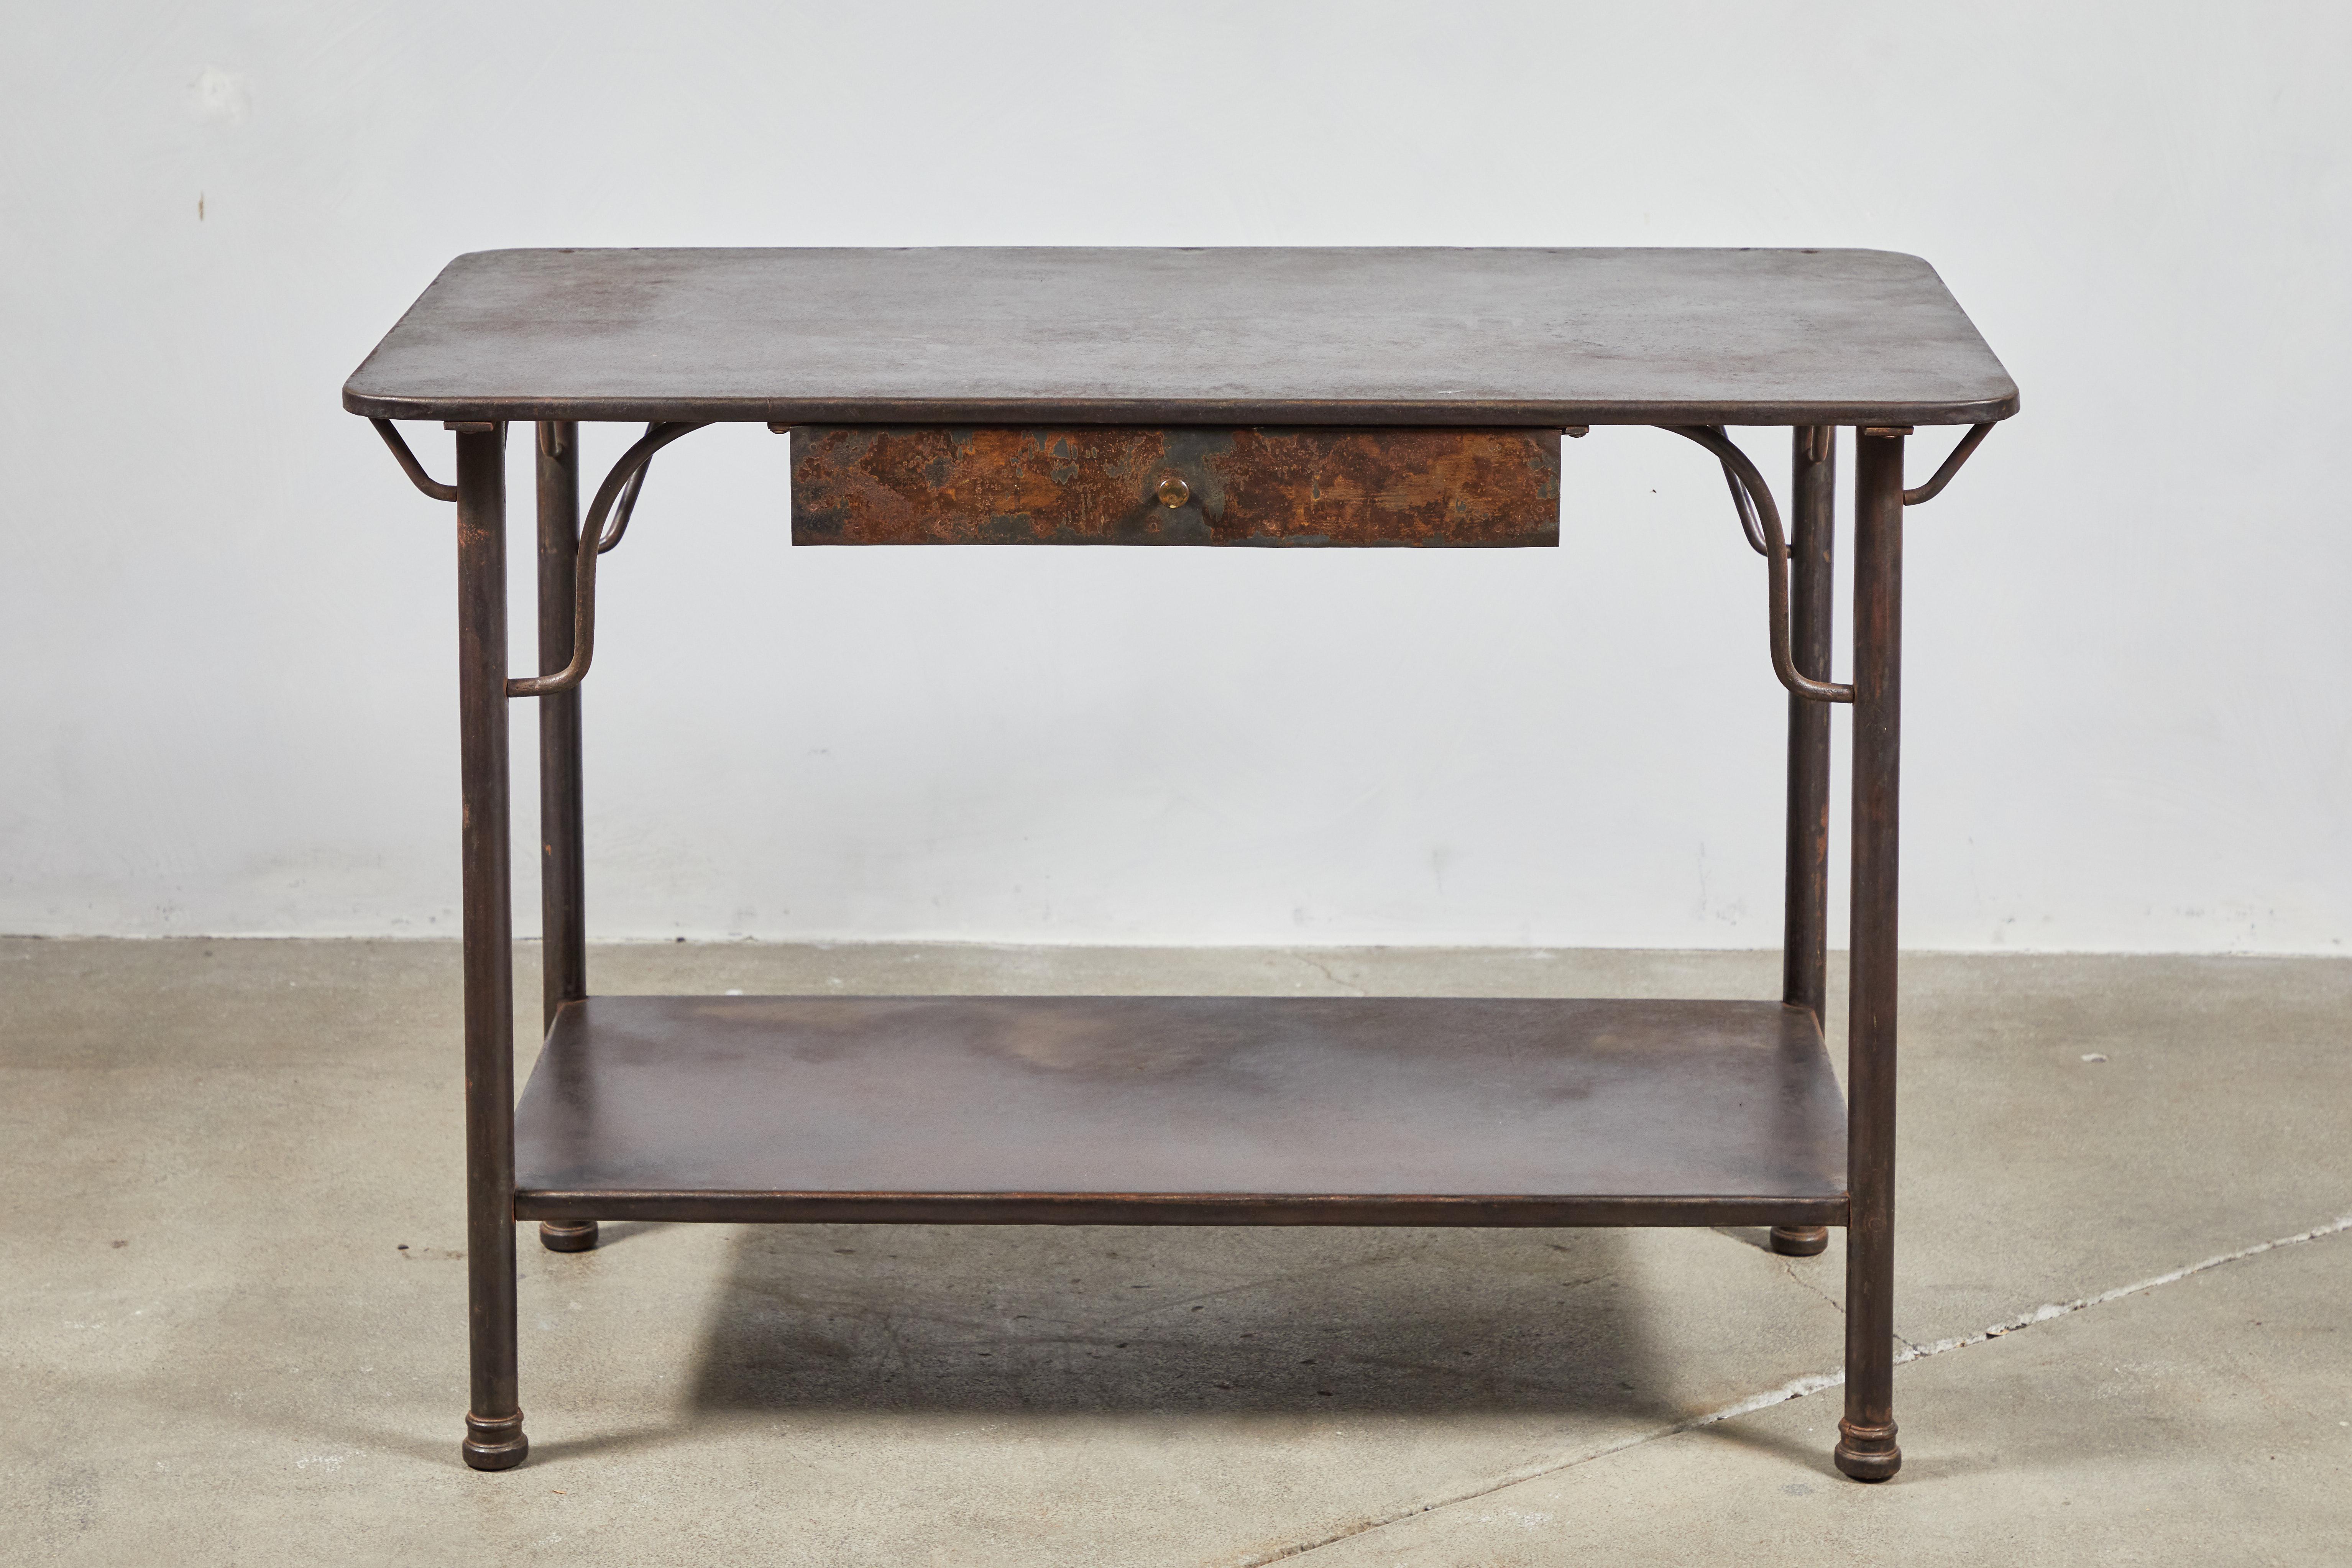 Vintage French metal table with lower shelf and single drawer. The table also makes for a great console.